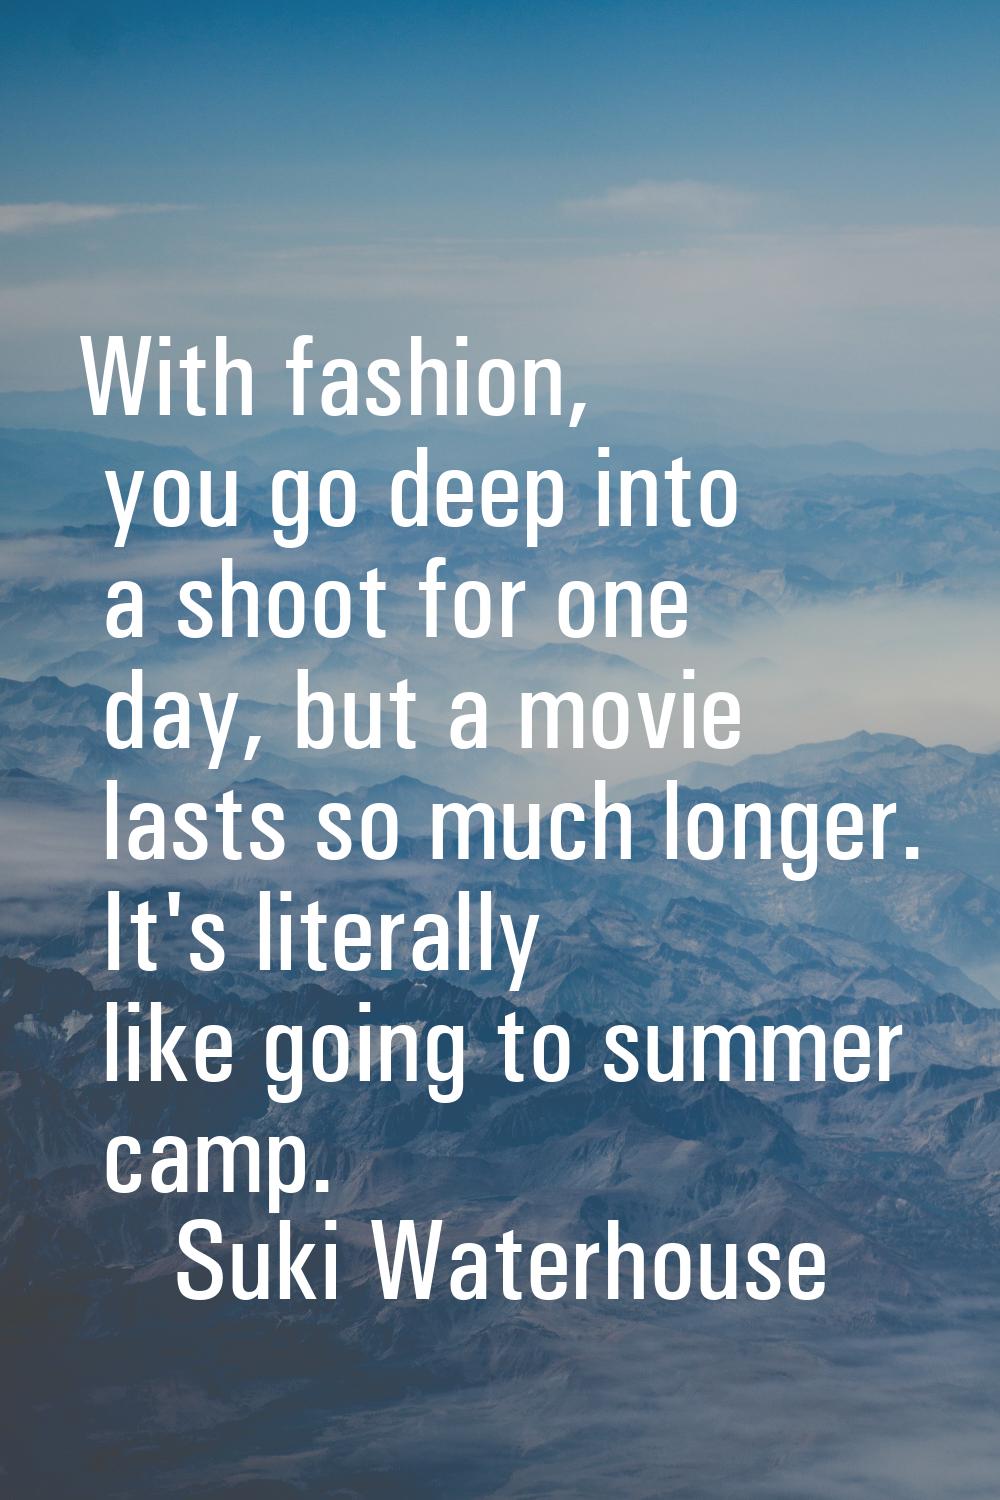 With fashion, you go deep into a shoot for one day, but a movie lasts so much longer. It's literall